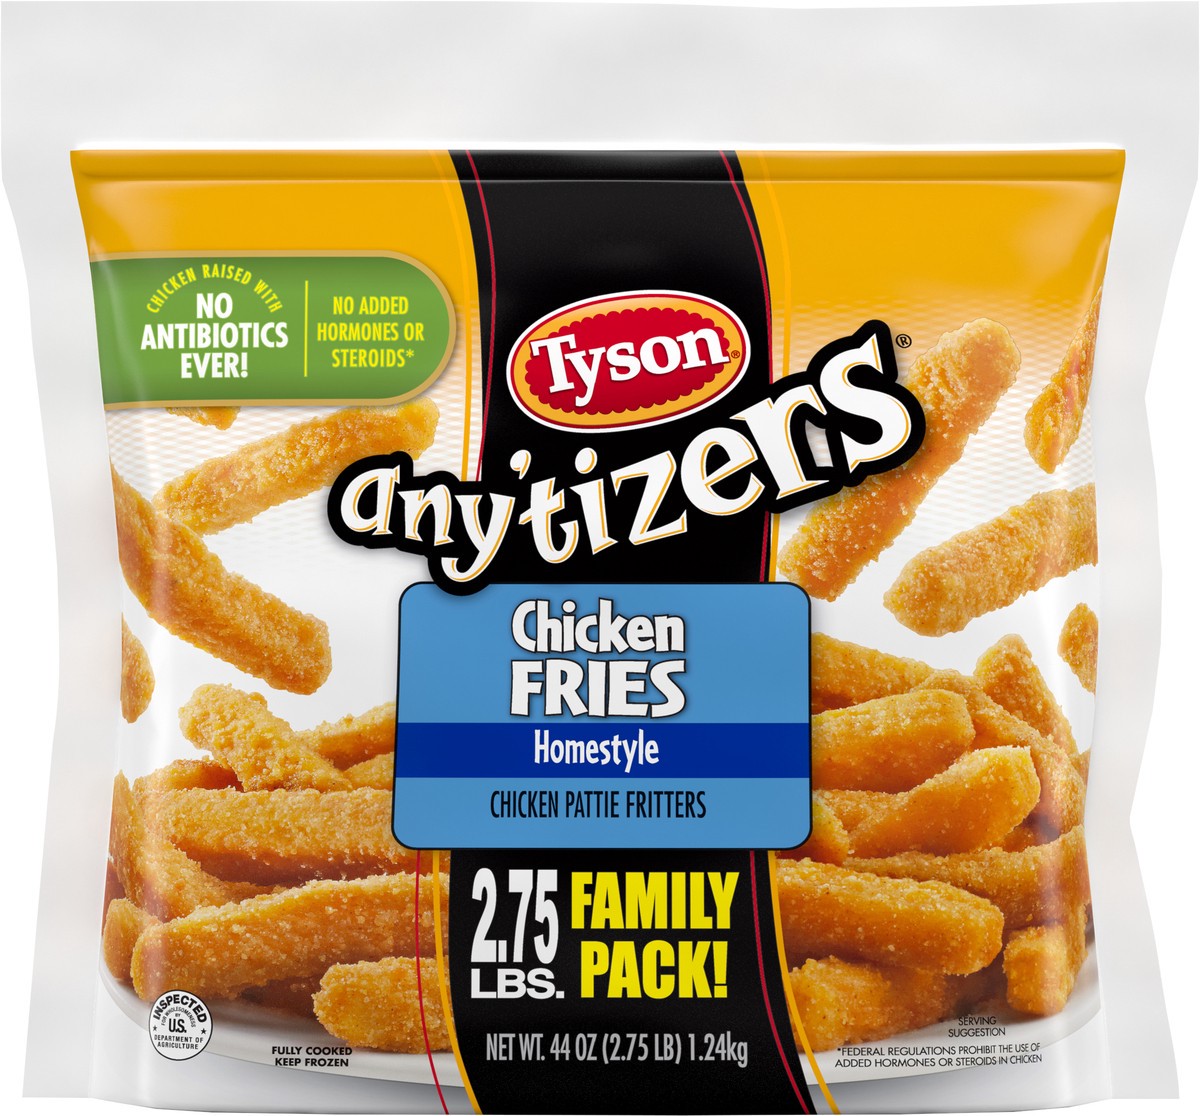 slide 6 of 6, TYSON ANYTIZERS Tyson Any'tizers Homestyle Chicken Fries, 44 oz. Family Pack (Frozen), 1.25 kg